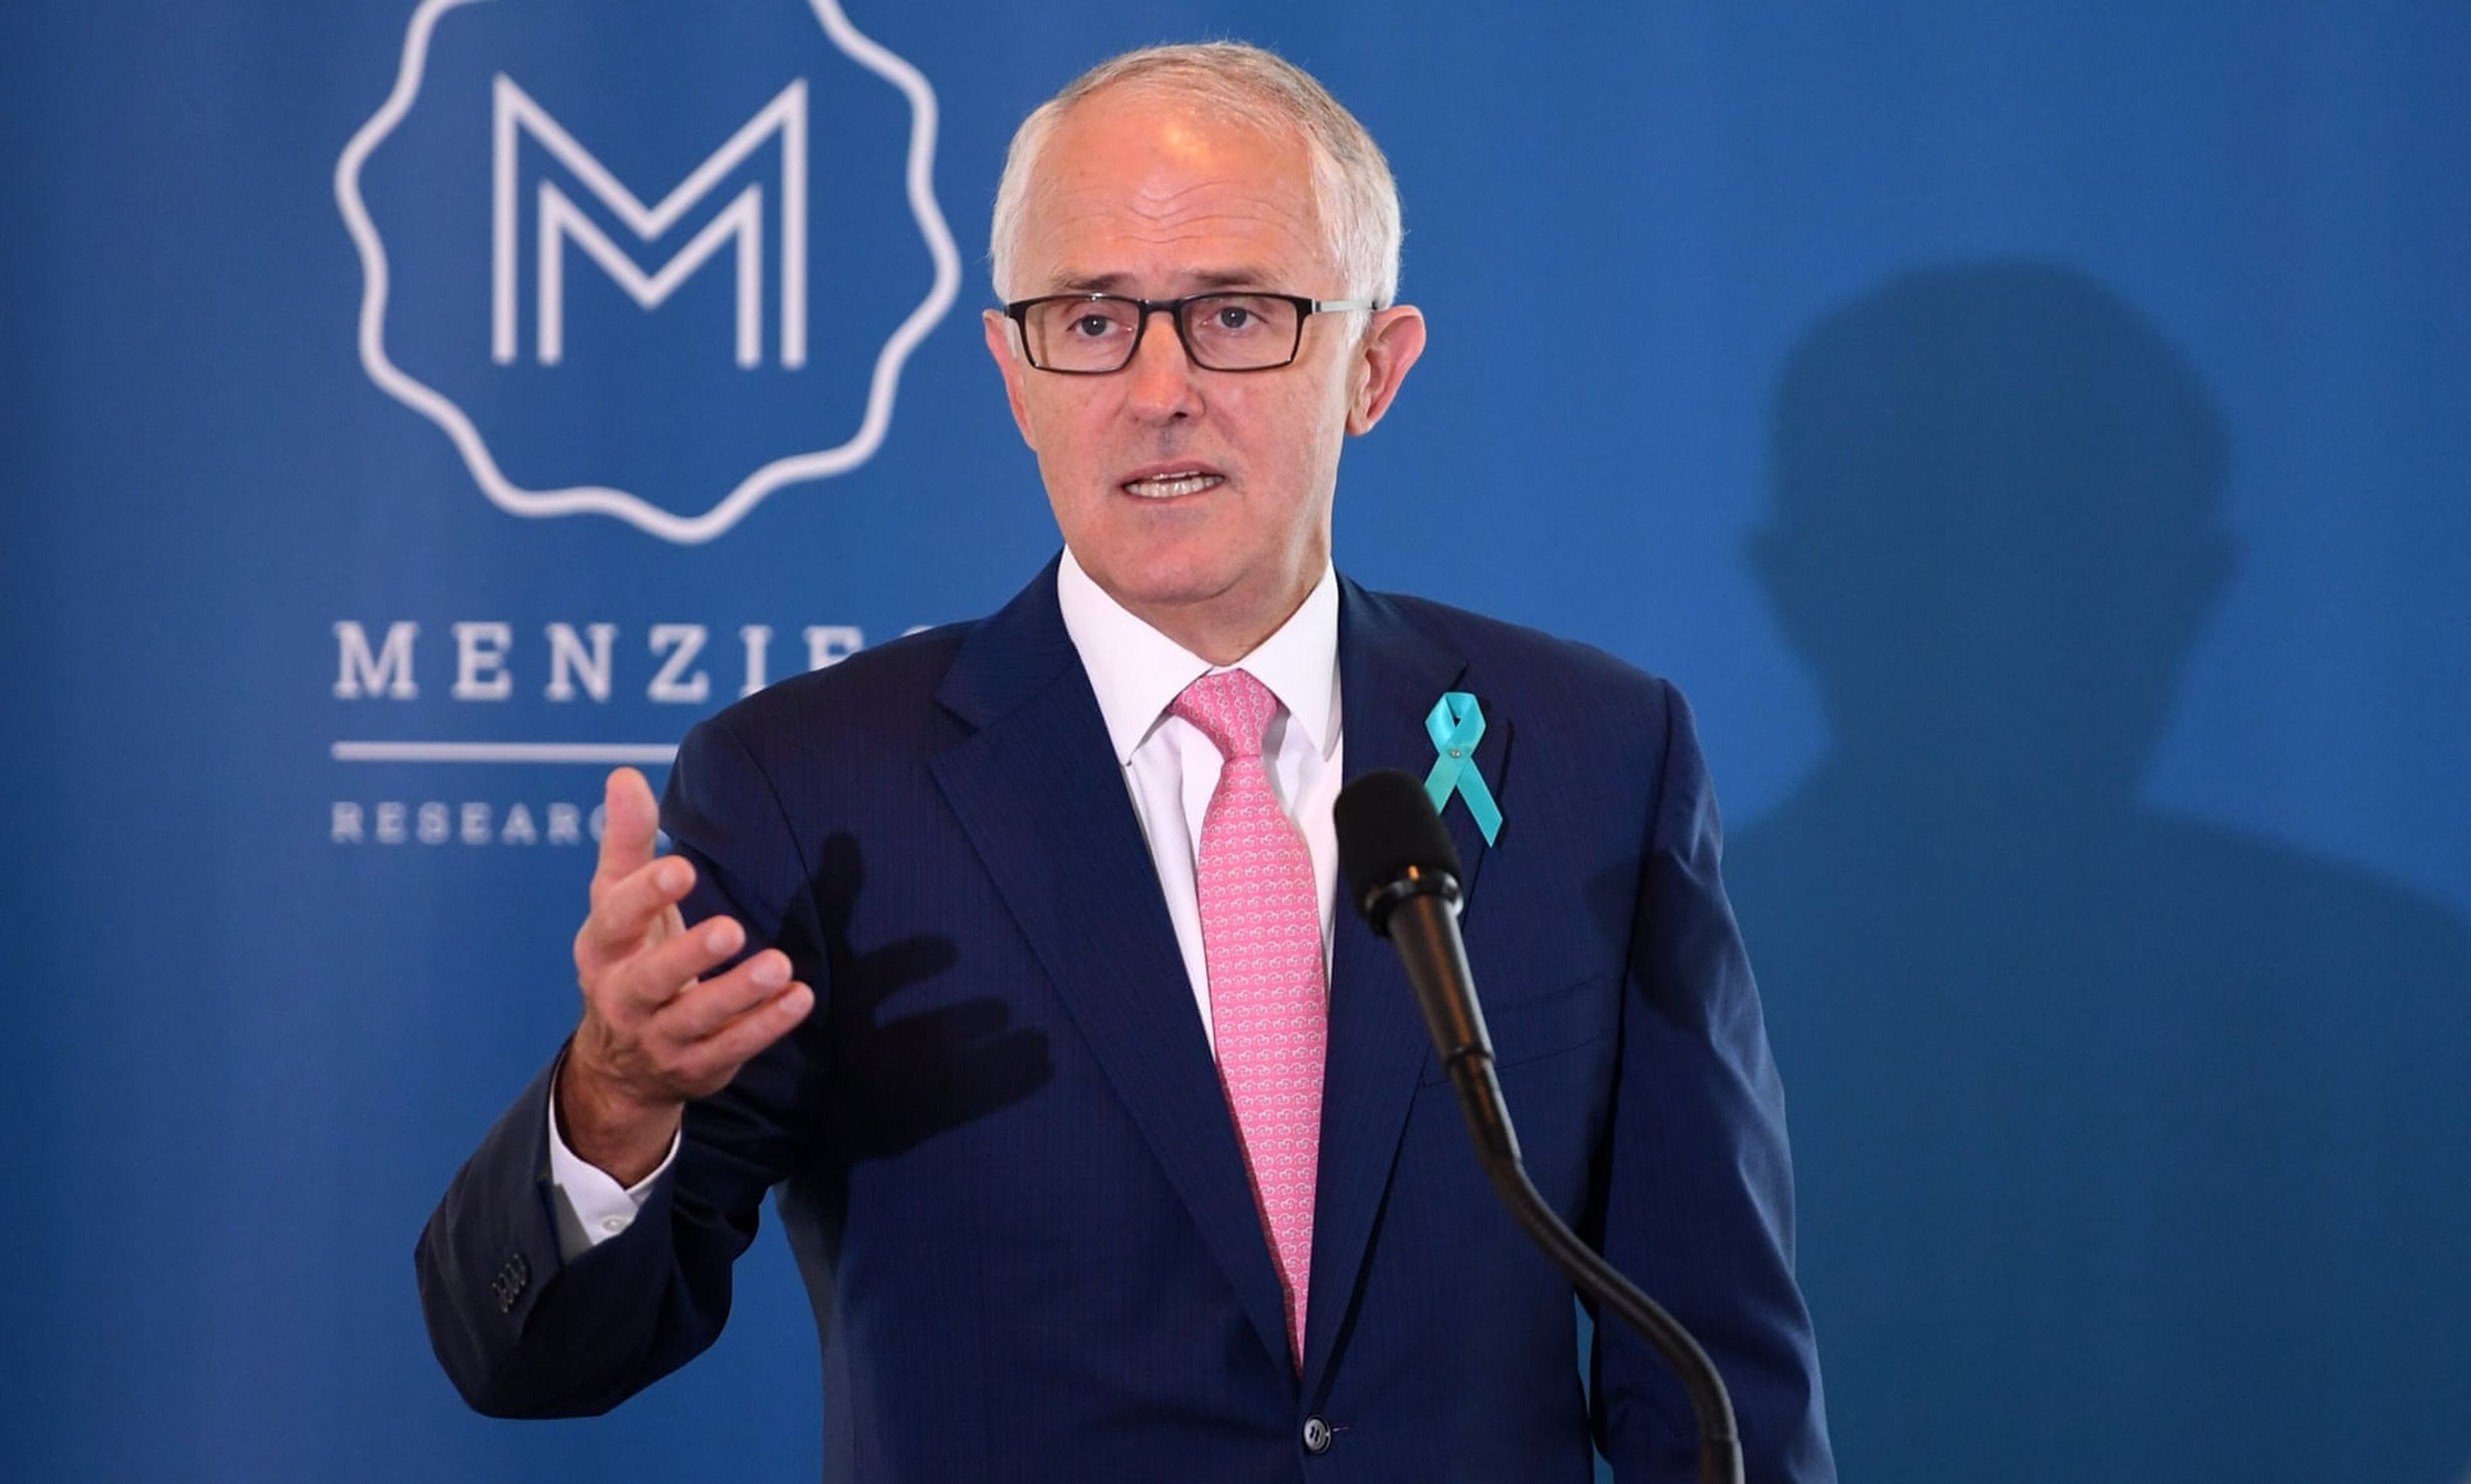 Malcolm Turnbull, chairmanof the Menzies Research Centre